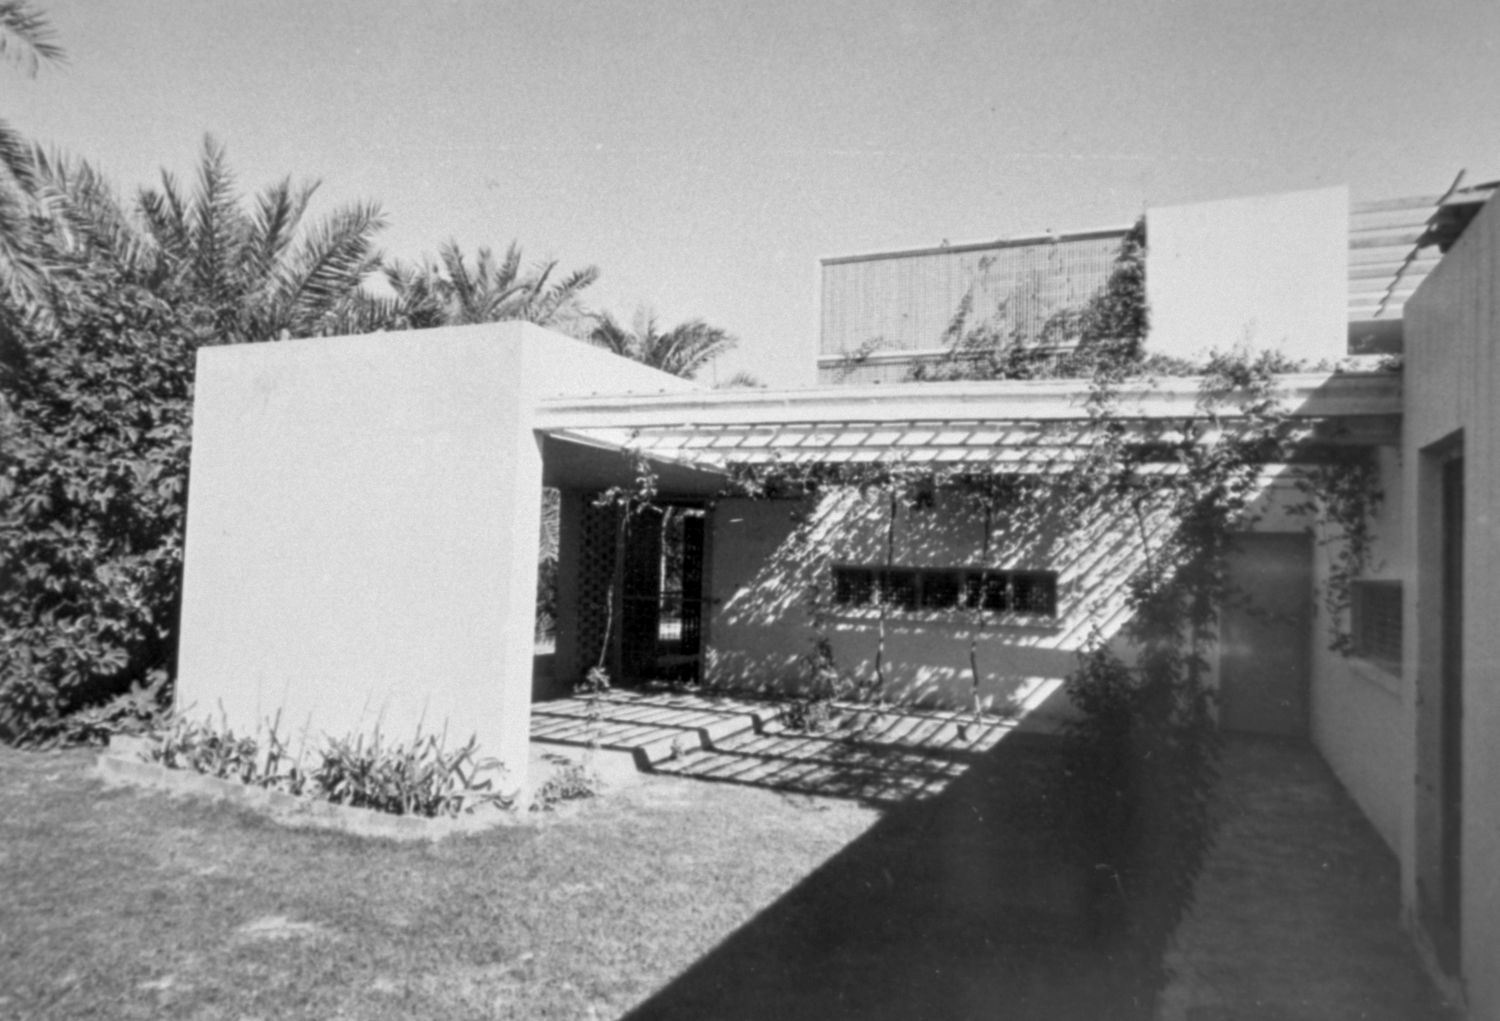 Exterior view showing side patio covered by an arbor.